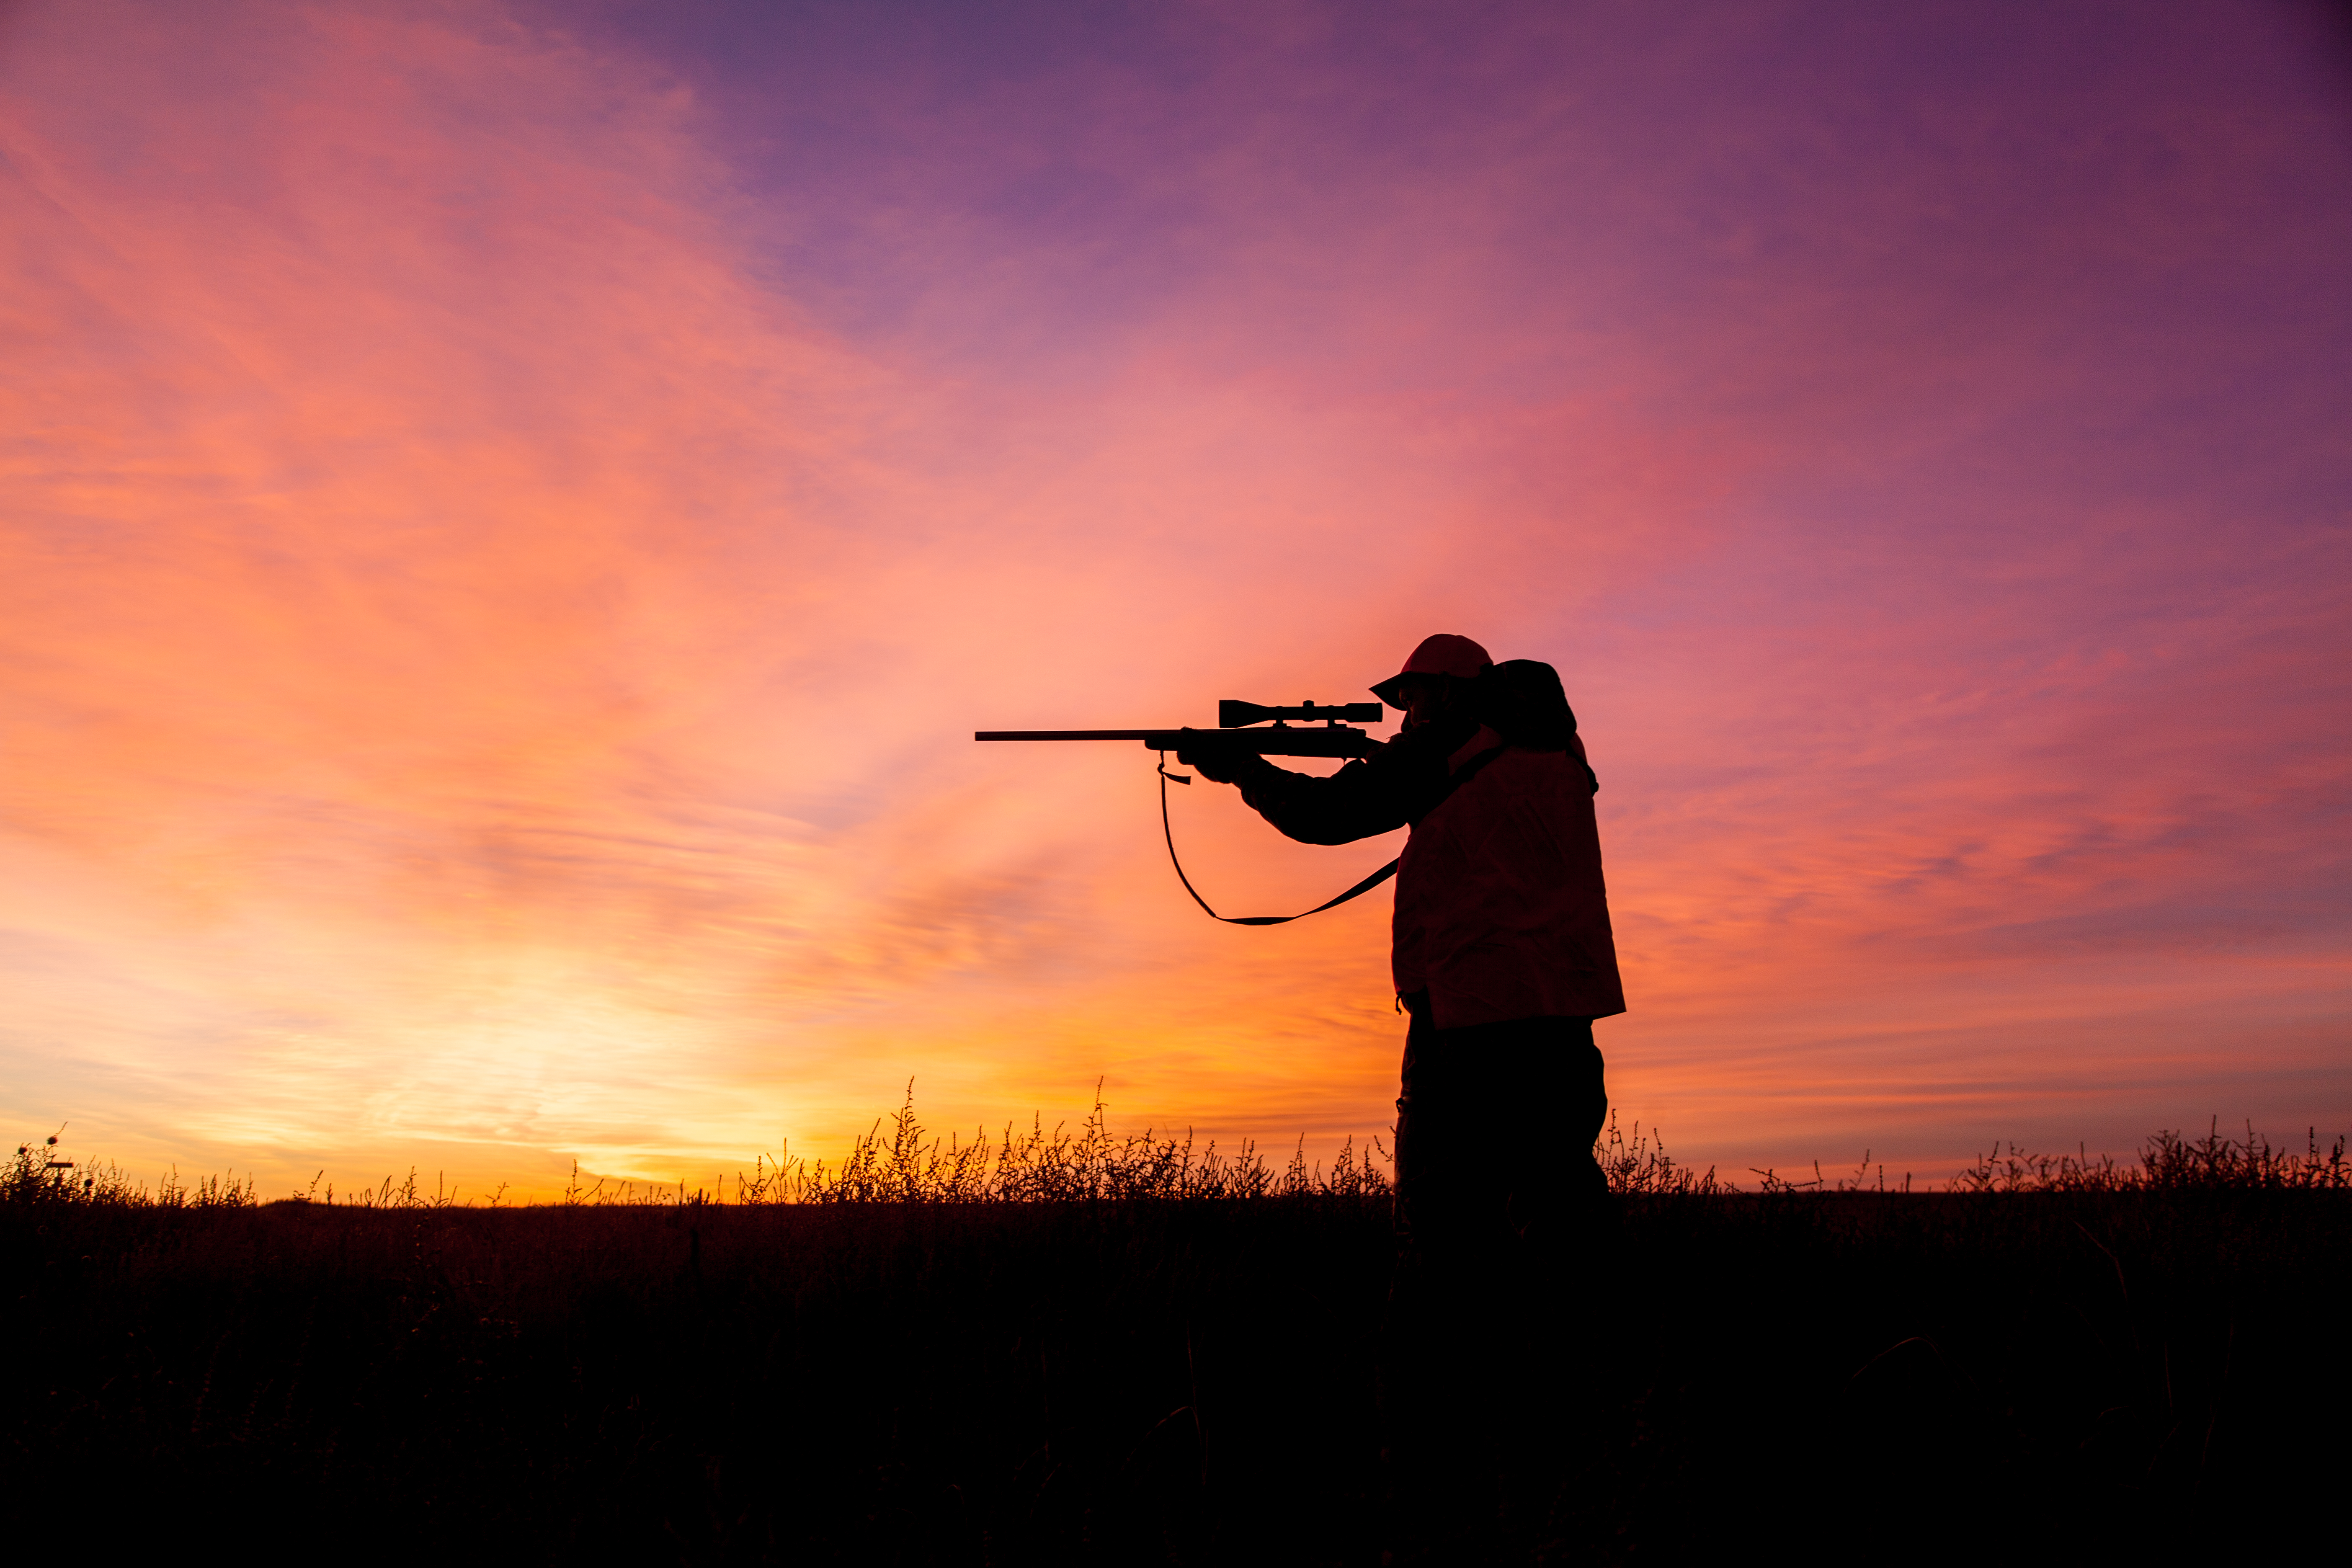 a hunter with rifle shouldered silhouetted in the sunrise